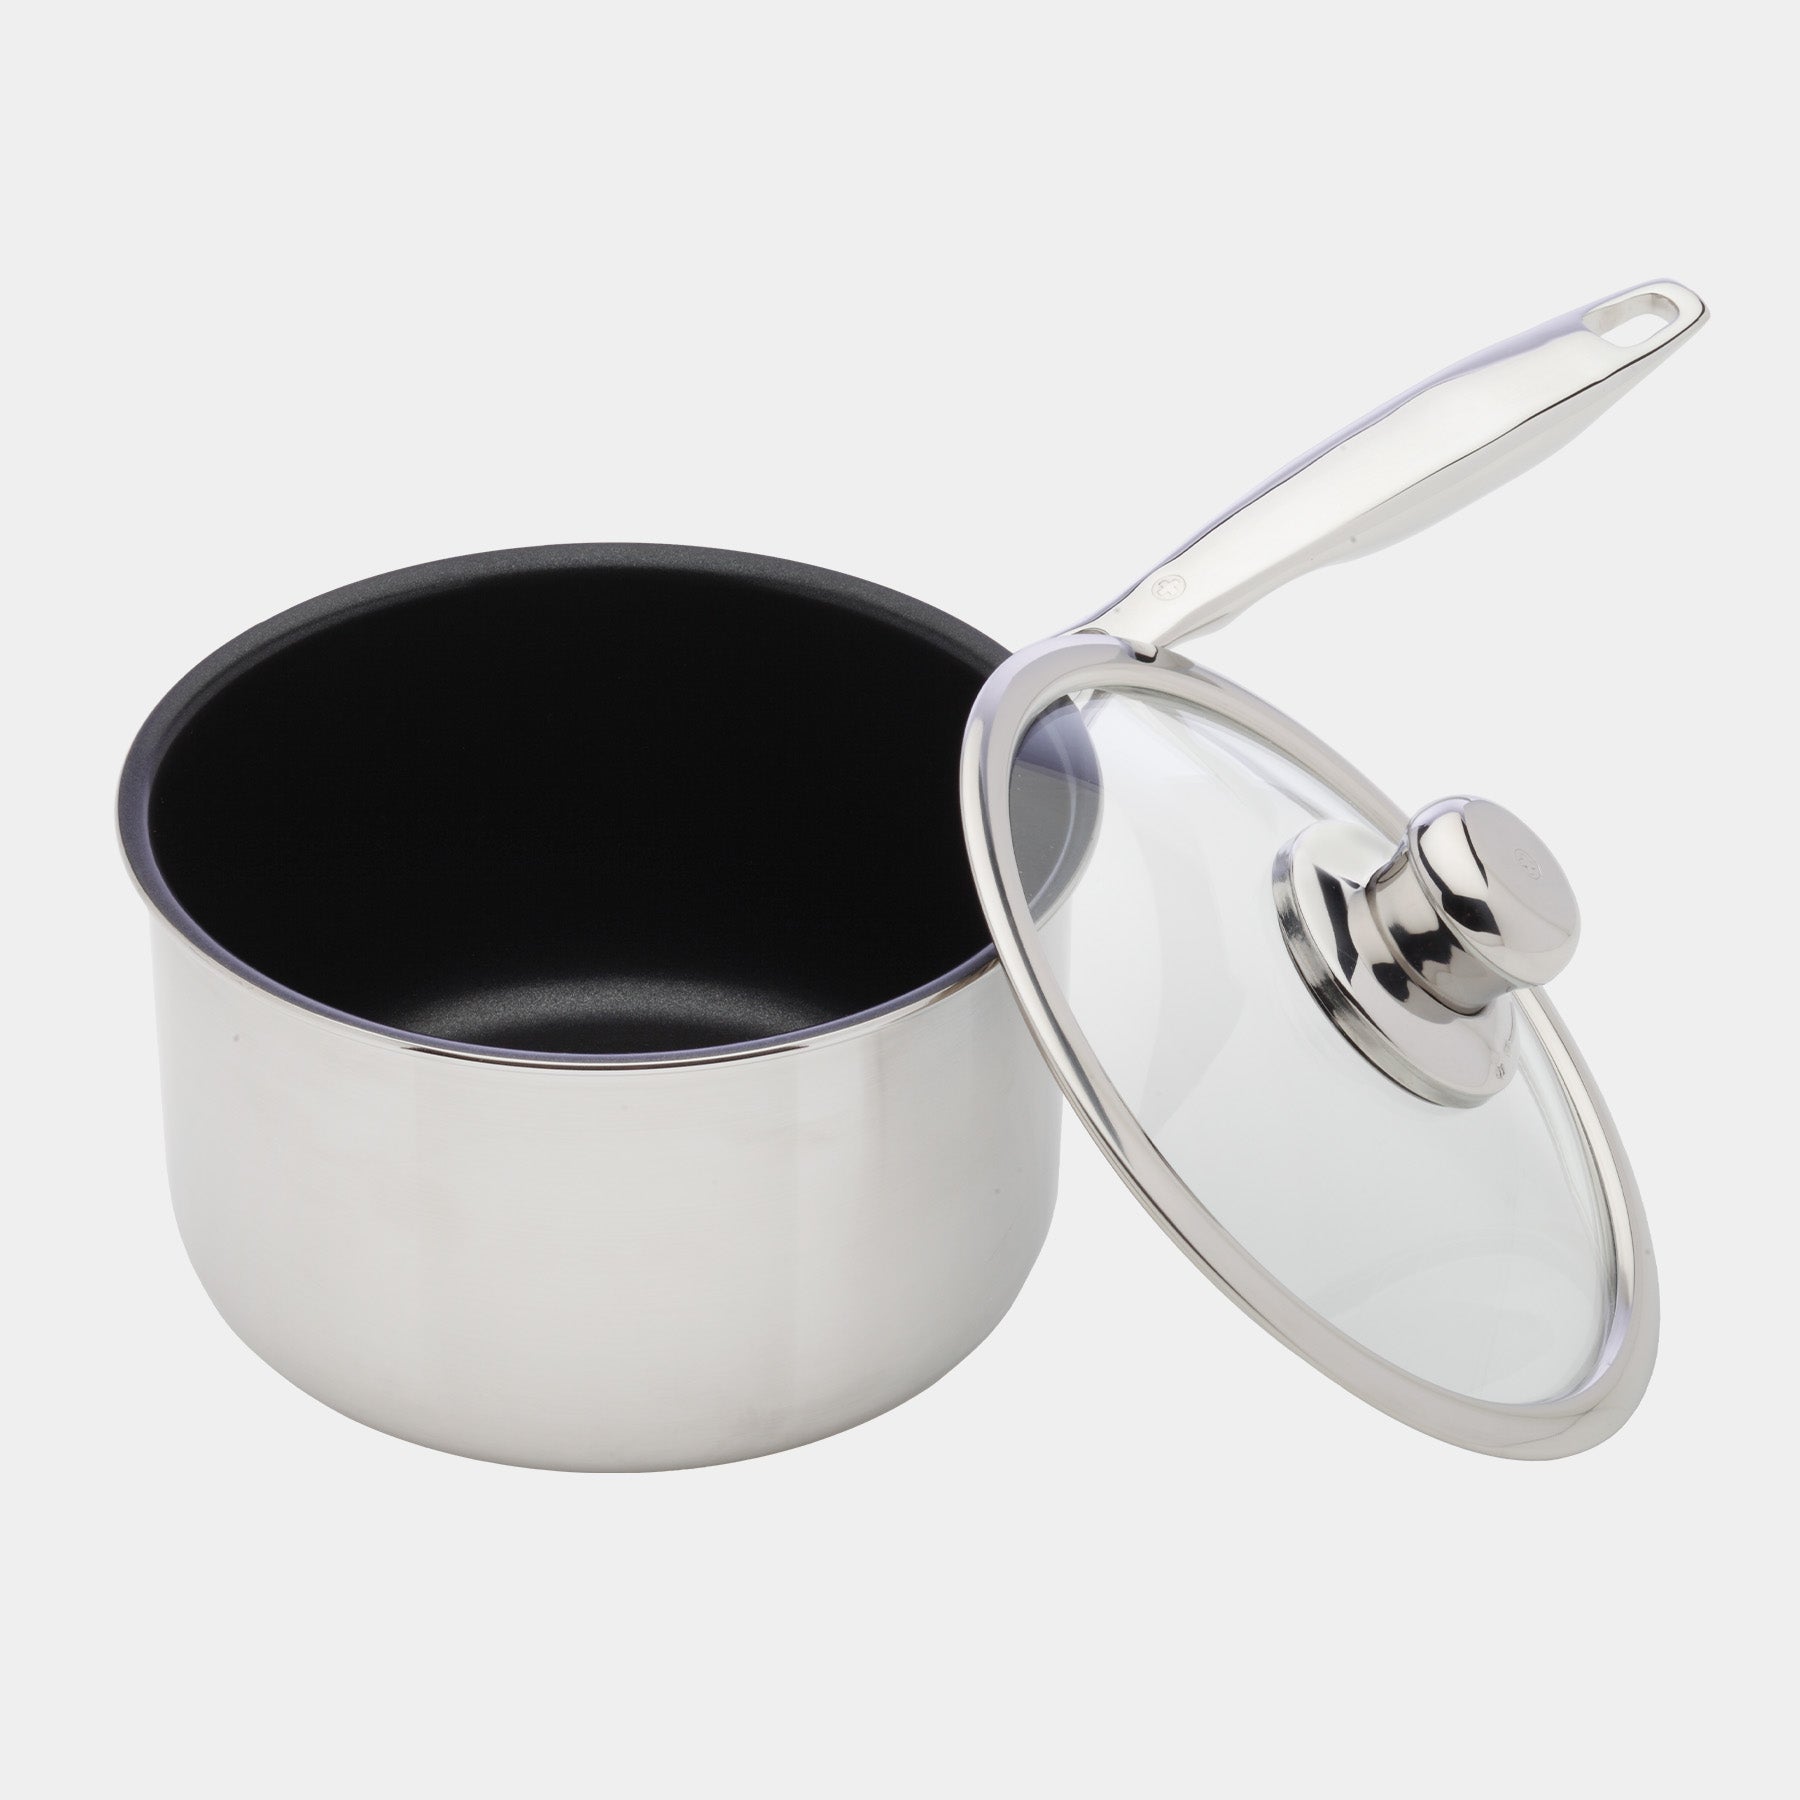 Nonstick Clad 2.6 qt Saucepan with Glass Lid - Induction